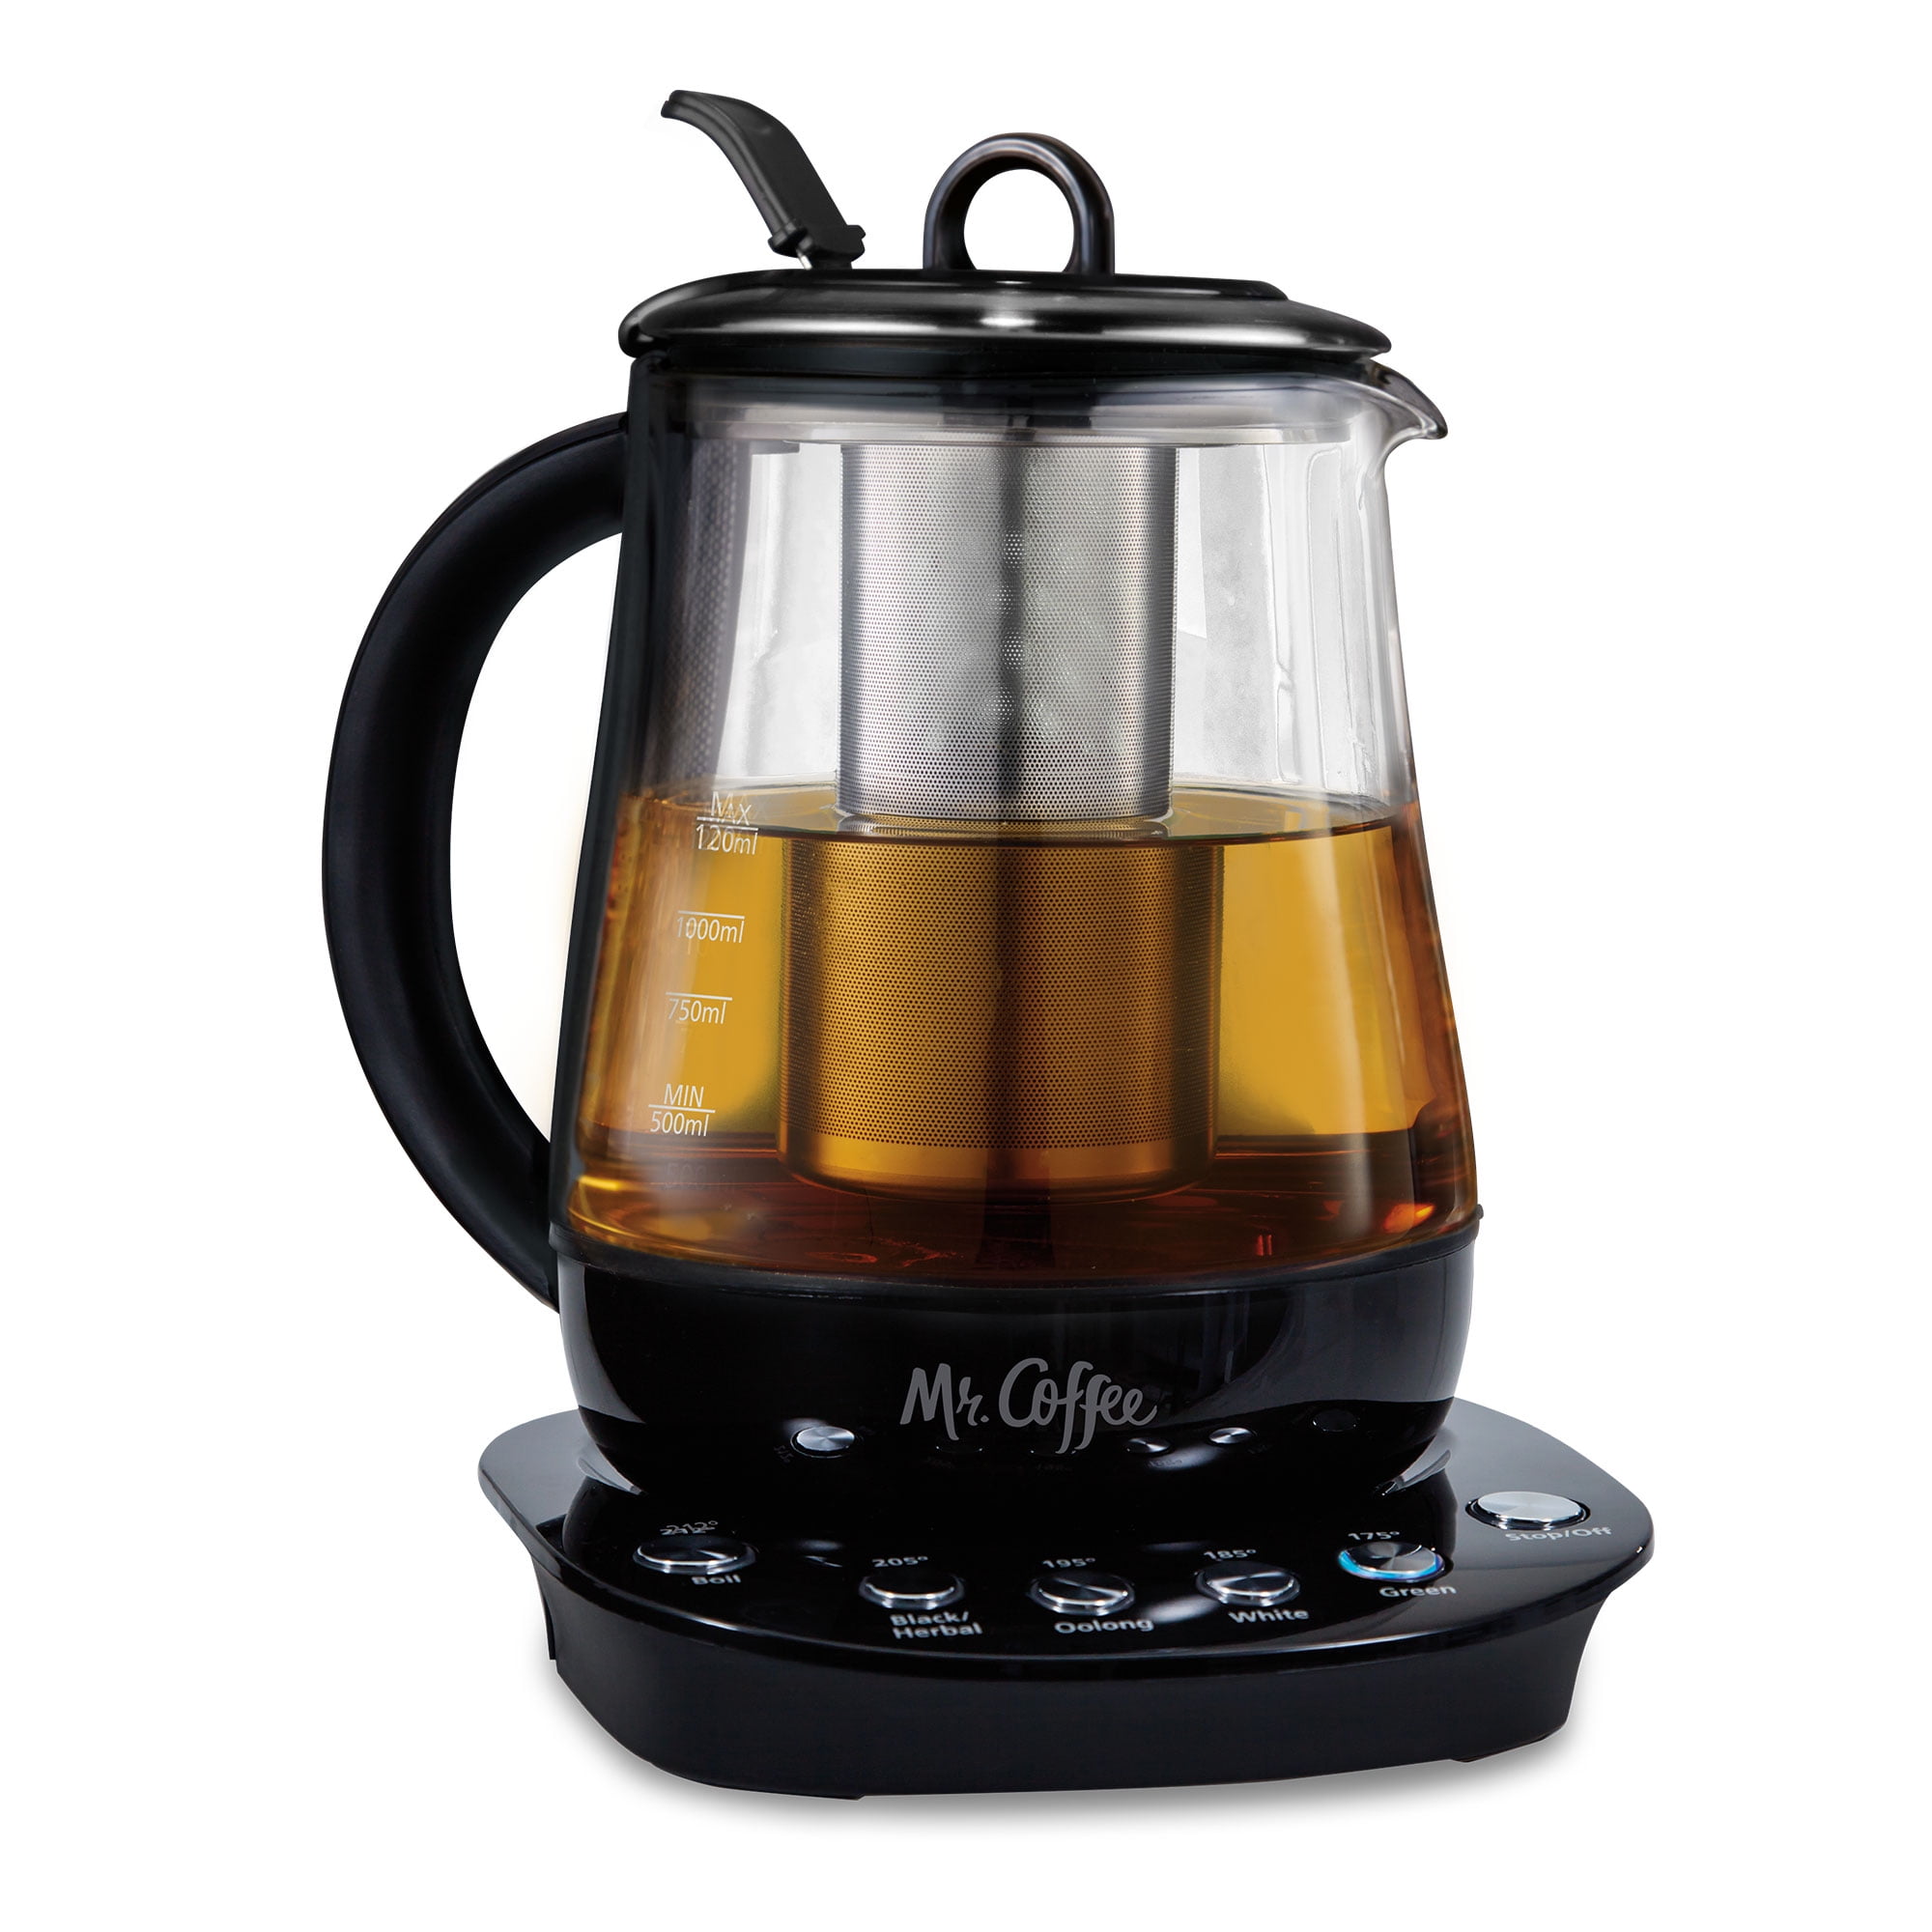 Mr. Coffee Tea Maker and Kettle review: With its steep timer and